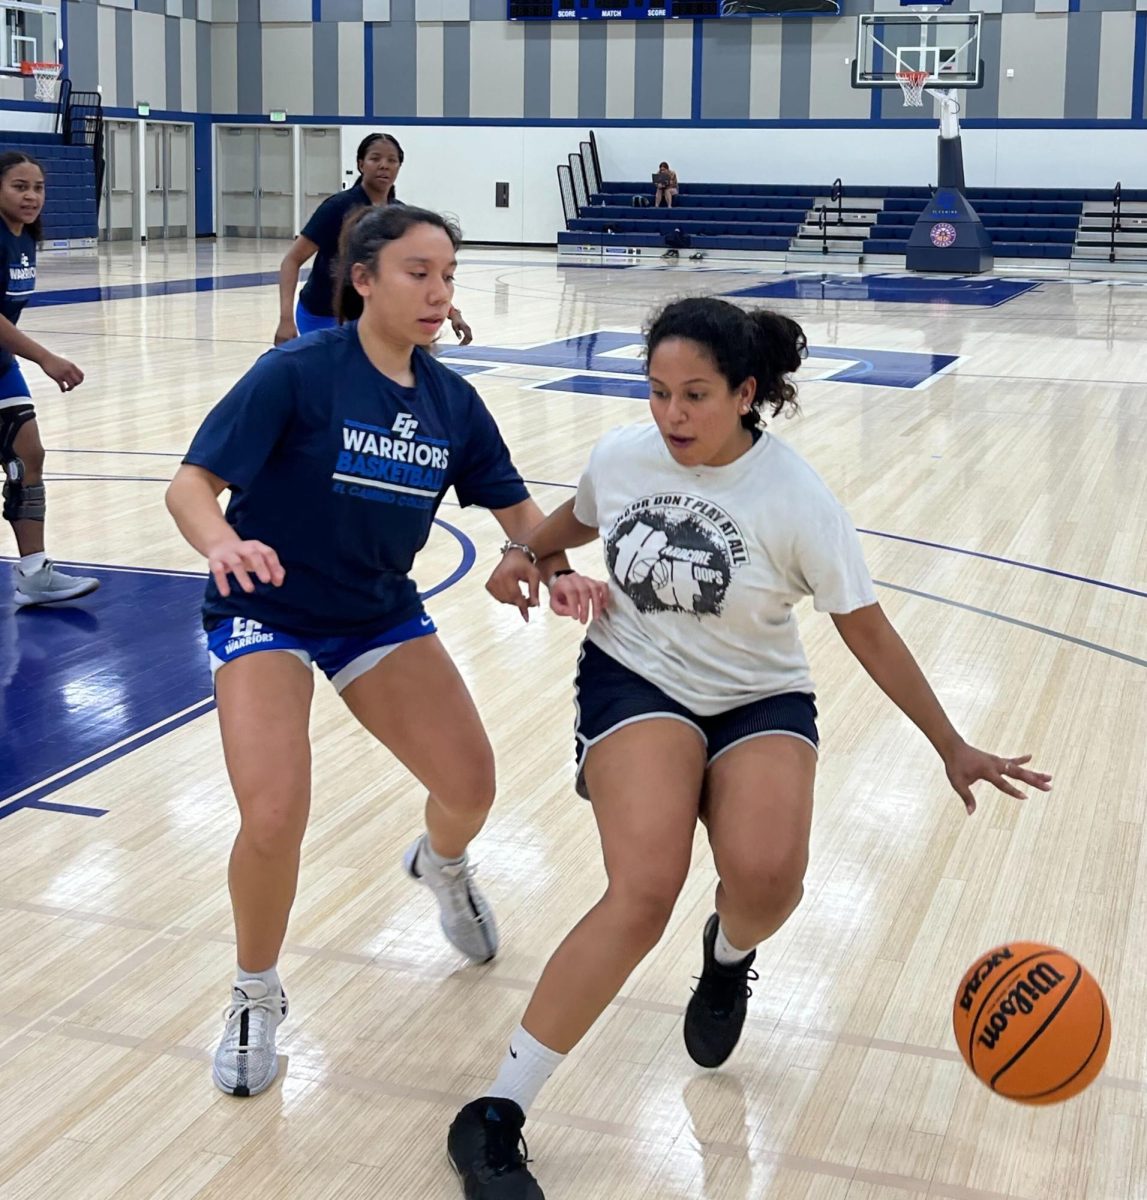 Warriors+guard+Teena+Ponce%2C+left%2C+defends+the+paint+during+the+teams+practice+at+the+ECC+Gym+Complex+on+Thursday%2C+Feb.+28.+This+was+Ponces+last+year+at+El+Camino+College.+She+made+the+2022-23+All+SCC+team+the+previous+year.+%28Tommy+Kallman+%7C+The+Union%29